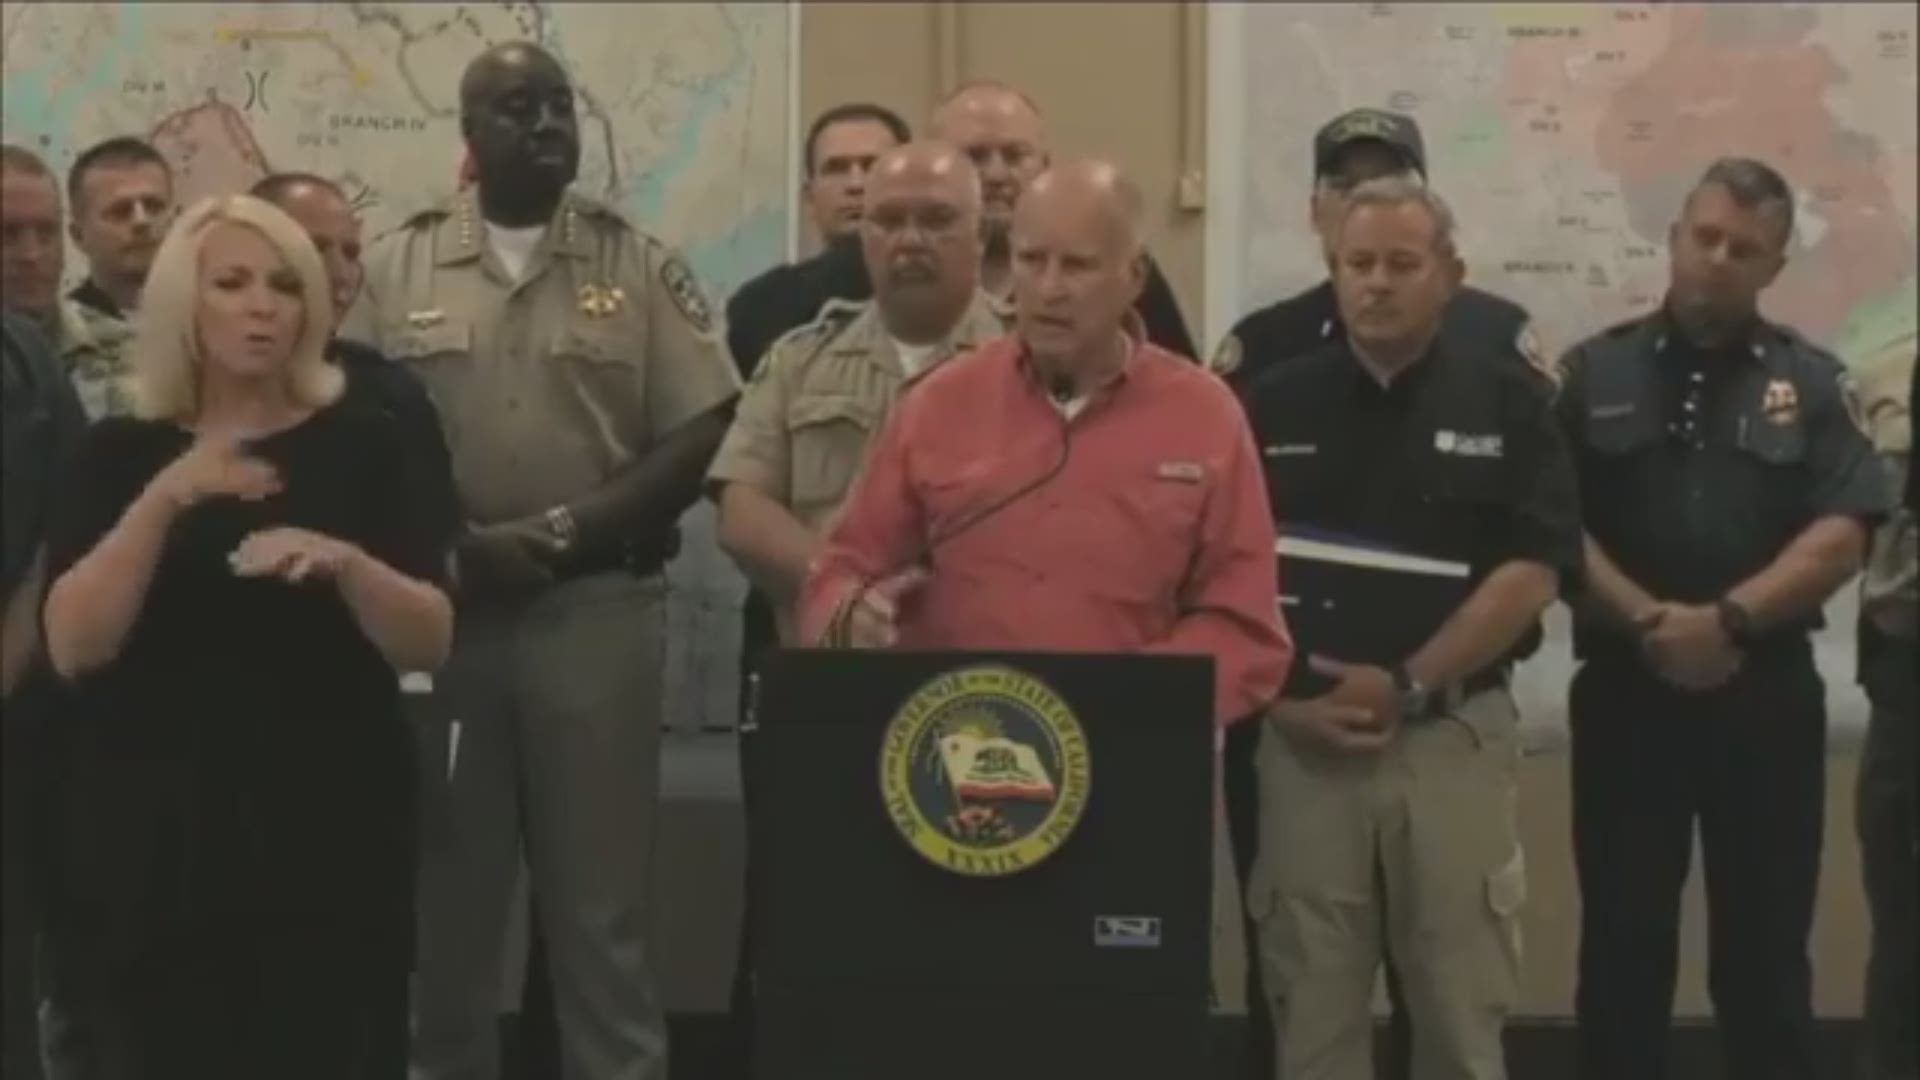 Gov. Jerry Brown held a press conference on Saturday, Aug. 4, with fire officials and called on President Donald Trump to help the state deal with this destructive wildfire season. (Source: Cal OES)